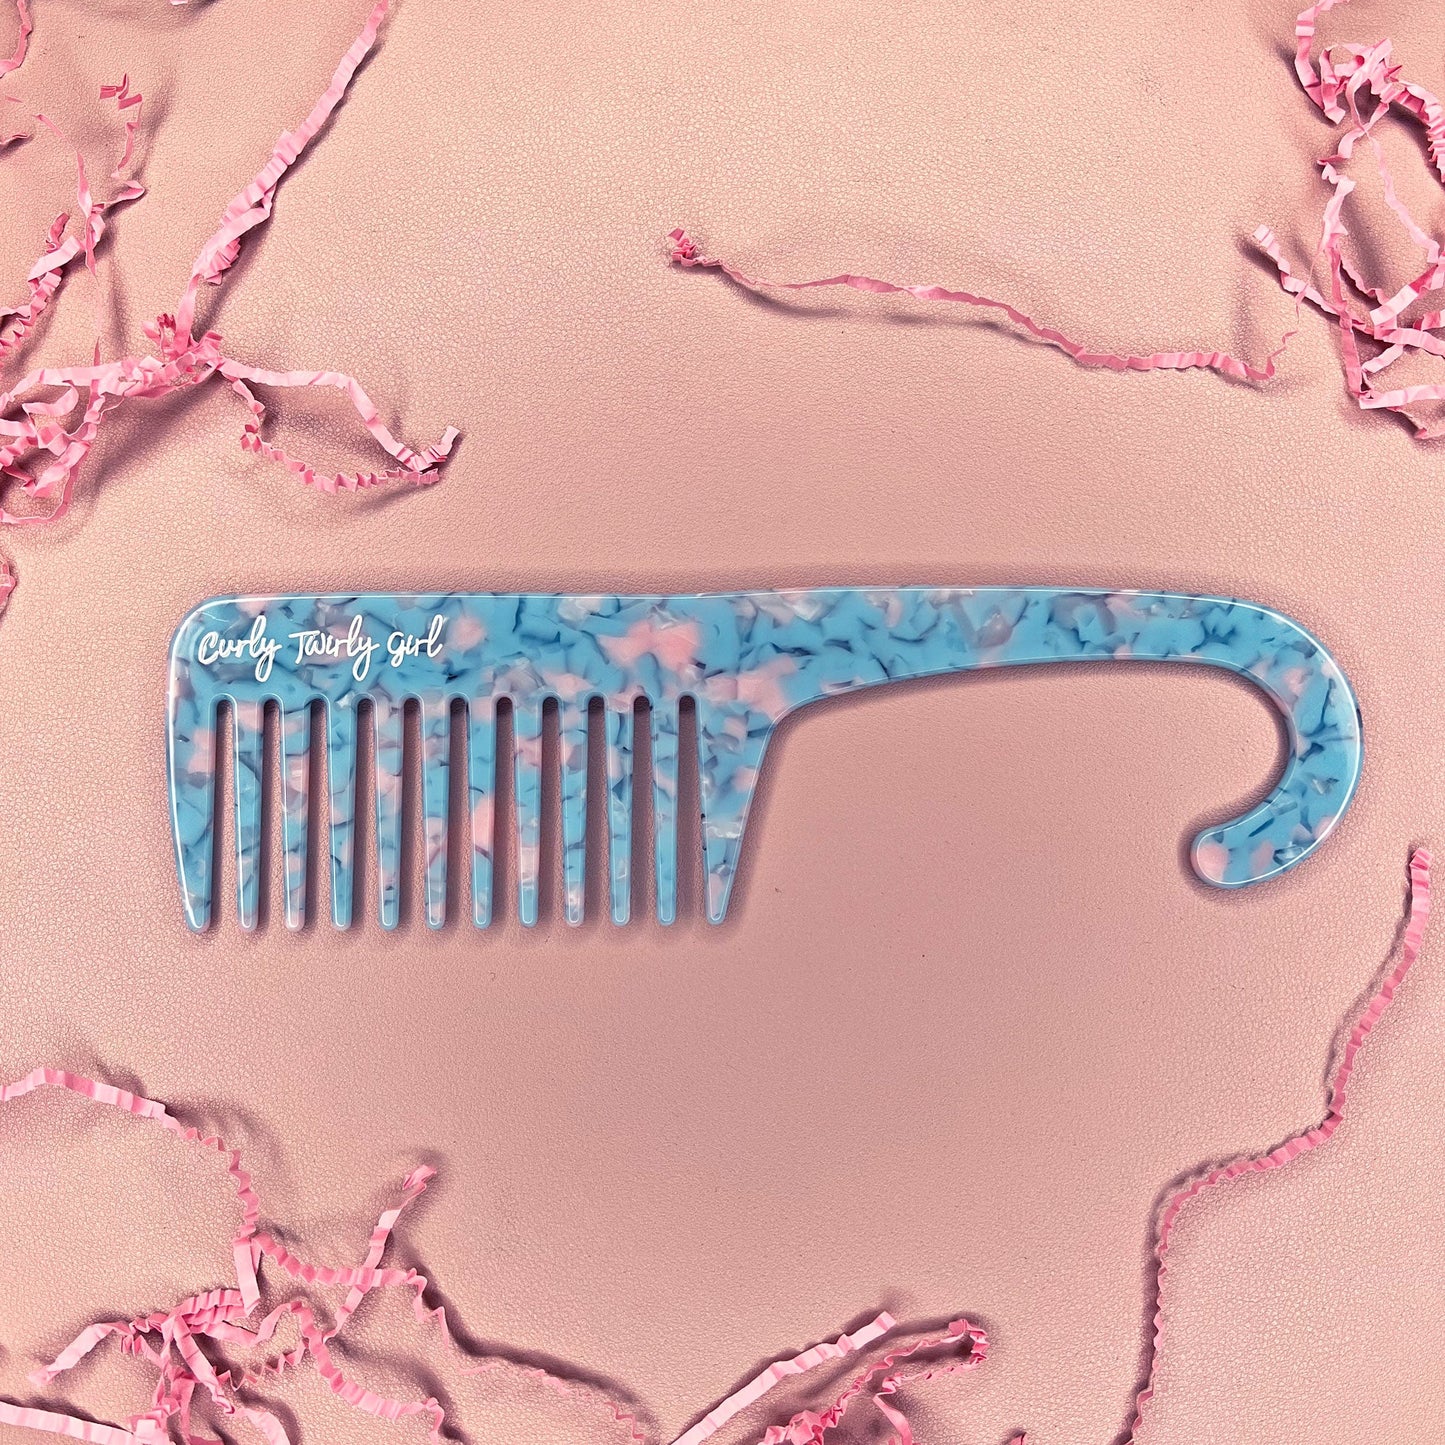 Blue wide tooth shower comb on pink table 